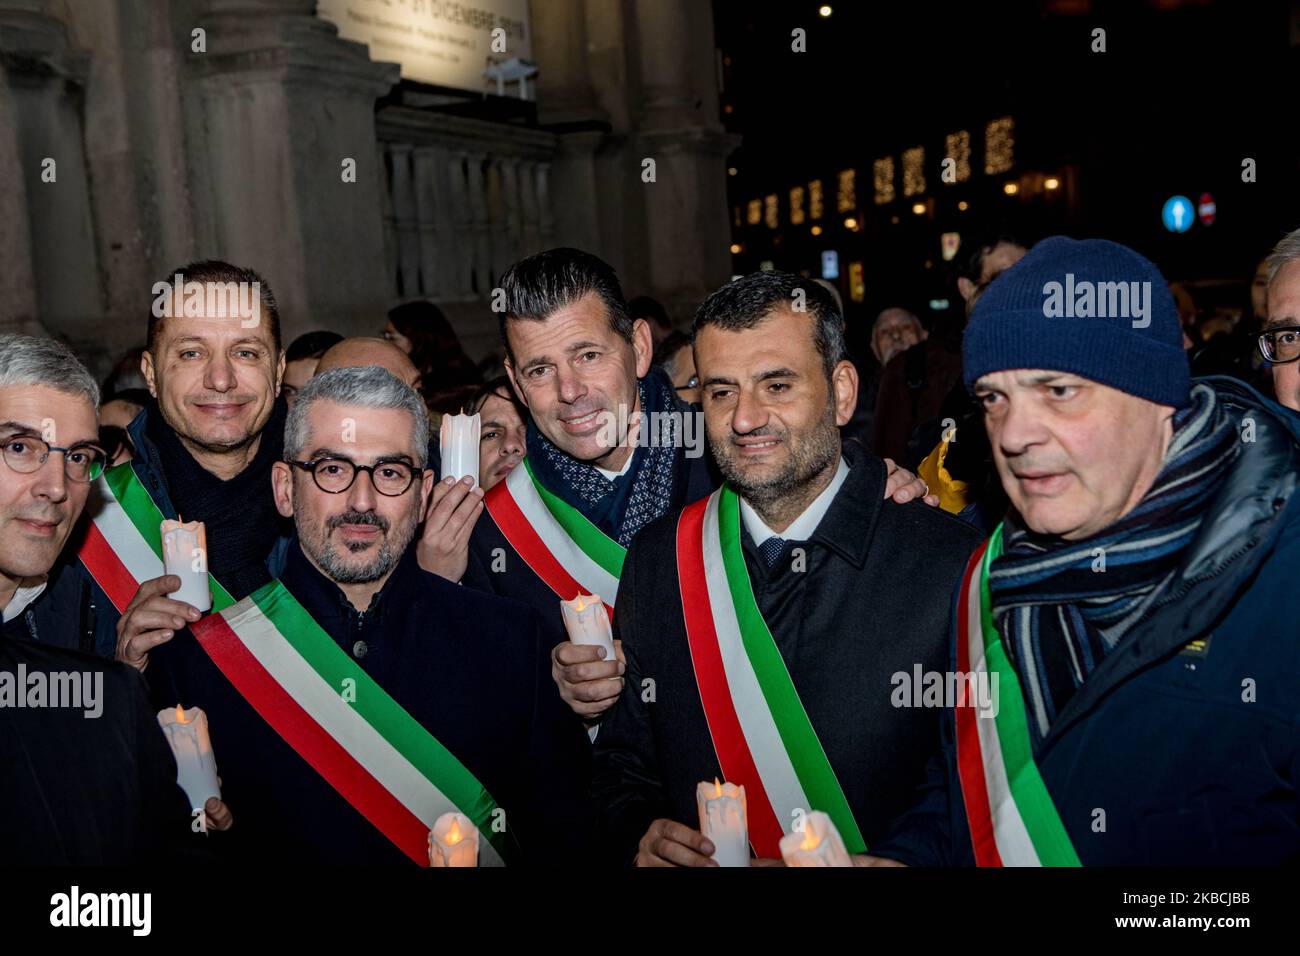 Antonio Decaro (2nd-R), Mayor of Bari, attends during the march 'L'odio NON HA Futuro' on December 10 2019 in Milan, Italy. More than 600 mayors and councillors joined the procession that crossed the entire Piazza del Duomo in Milan and ended in Piazza della Scala where Liliana Segre spoke for a public intervention against the hatred that is increasing in Italy and Europe. (Photo by Mairo Cinquetti/NurPhoto) Stock Photo